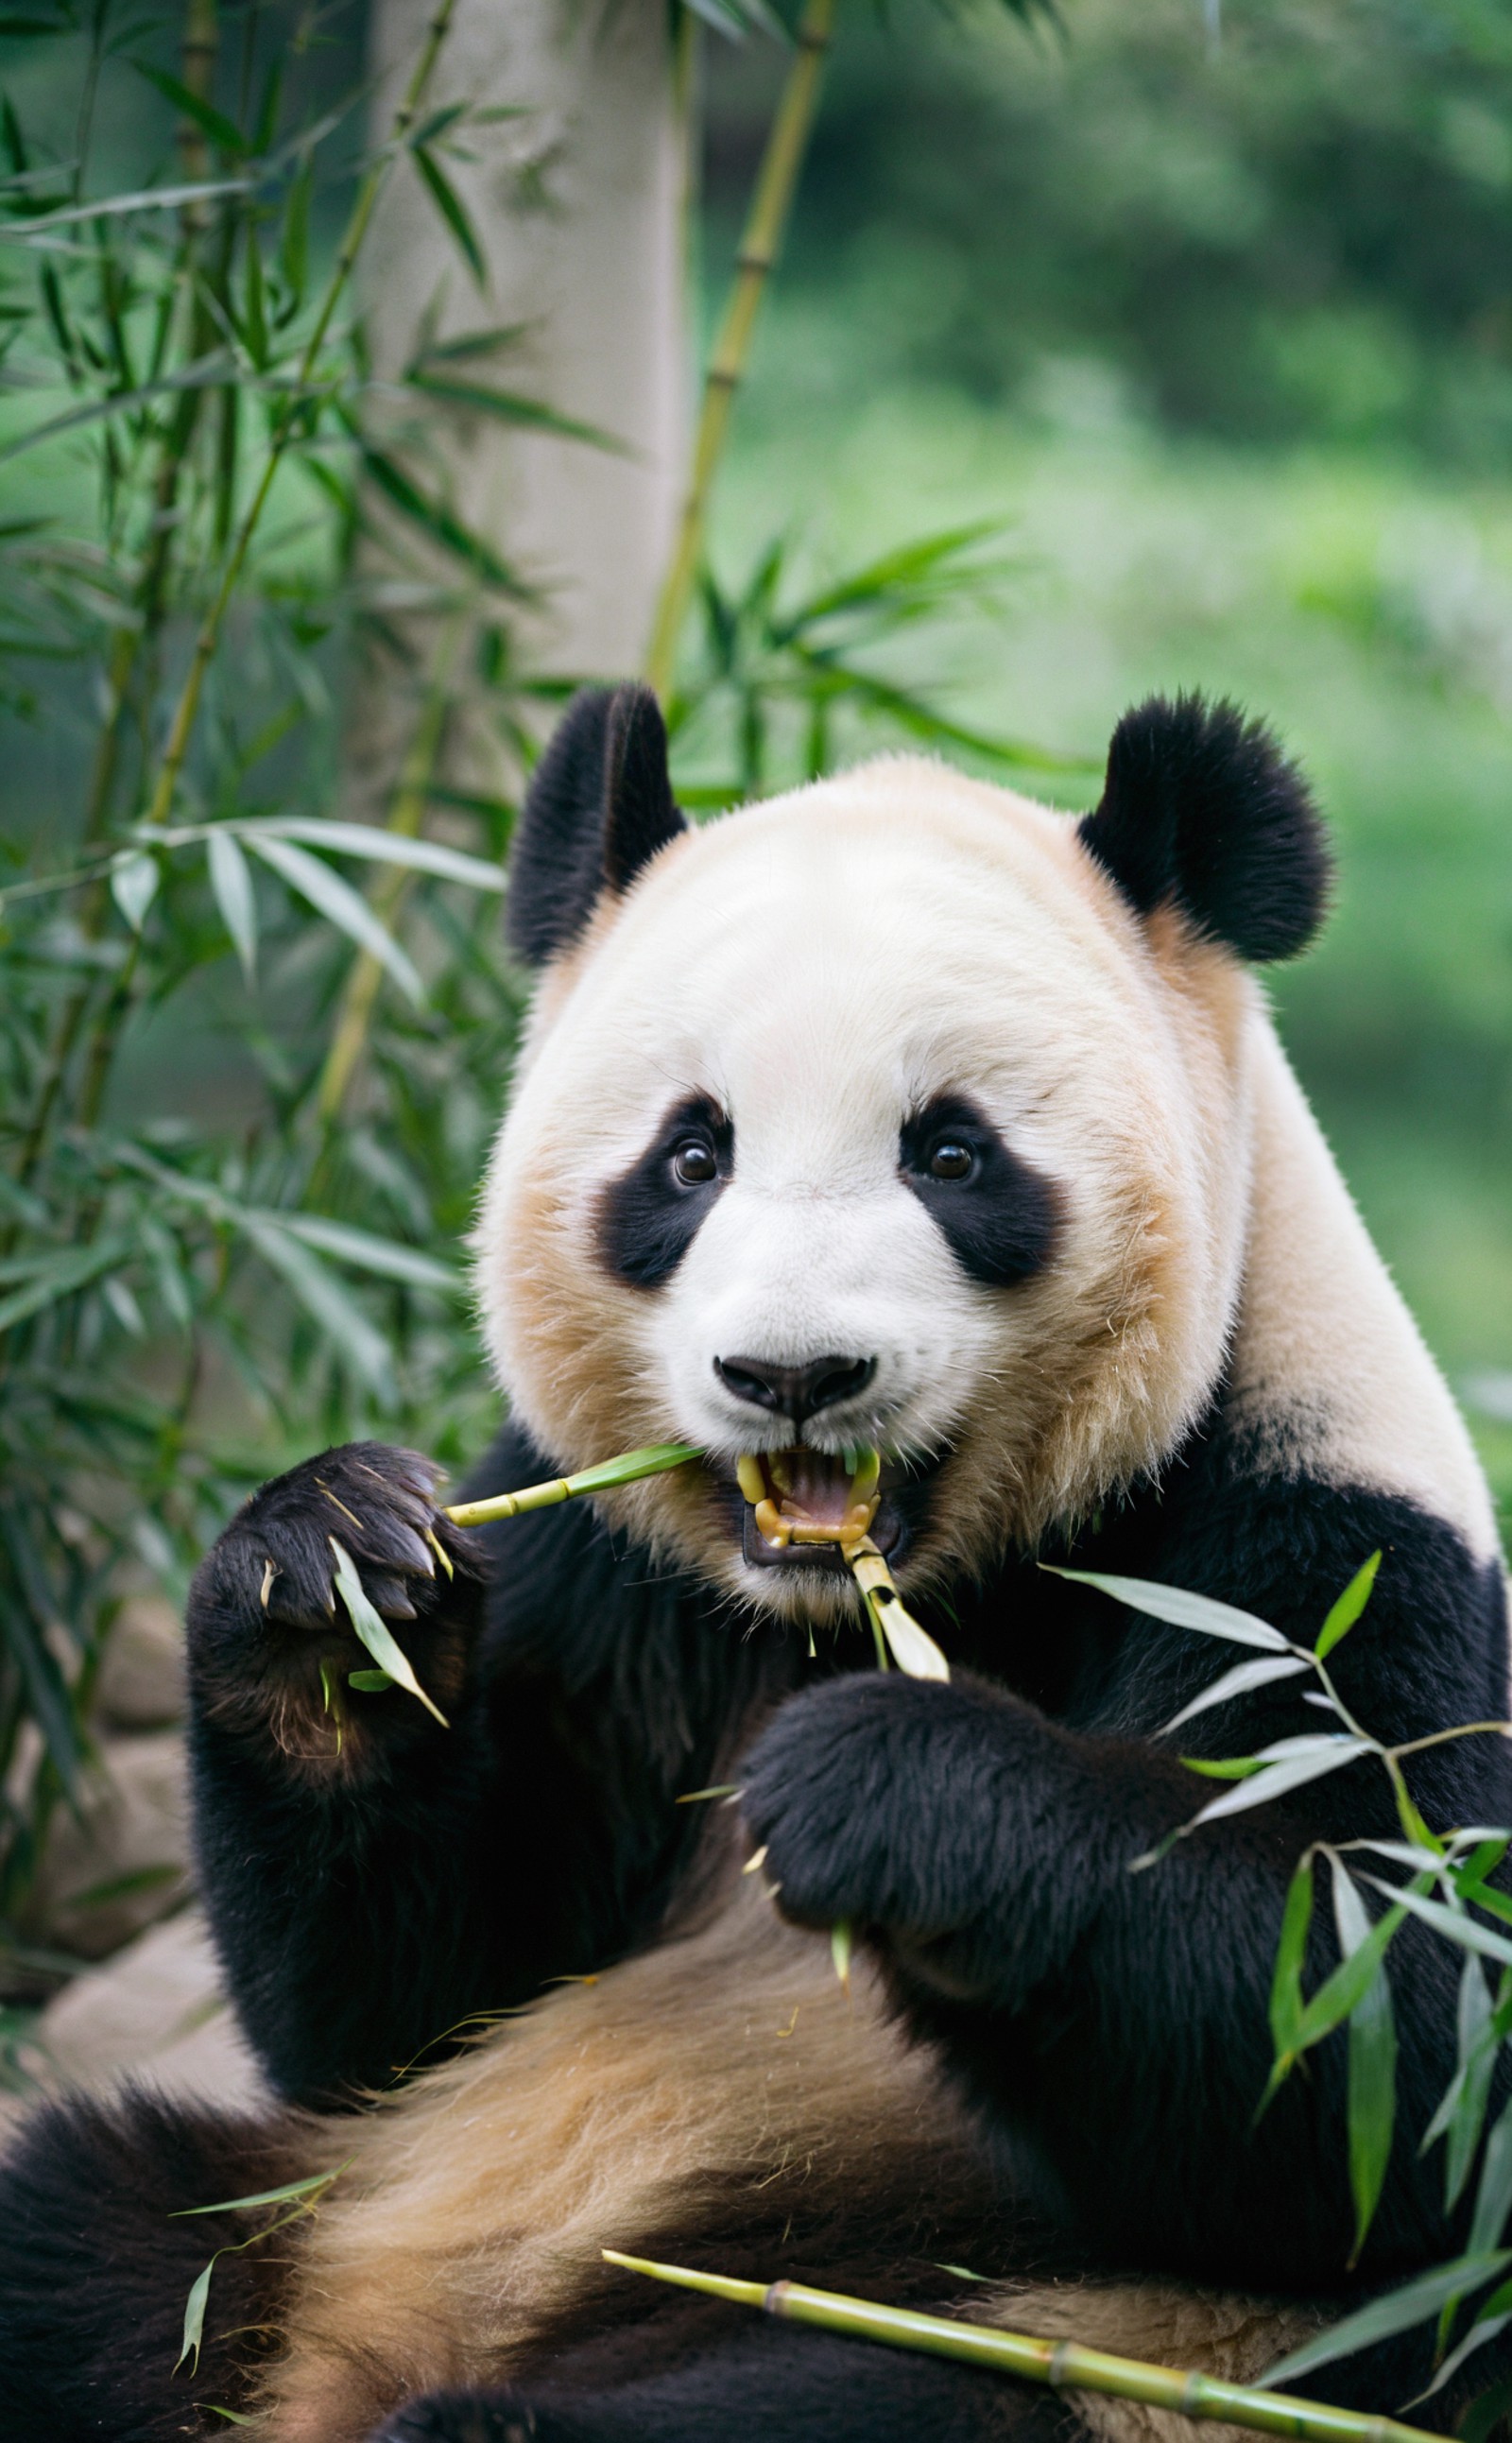 film photography aesthetic,A vibrant, close-up photograph of an adult Giant Panda, front and center amidst a backdrop of l...